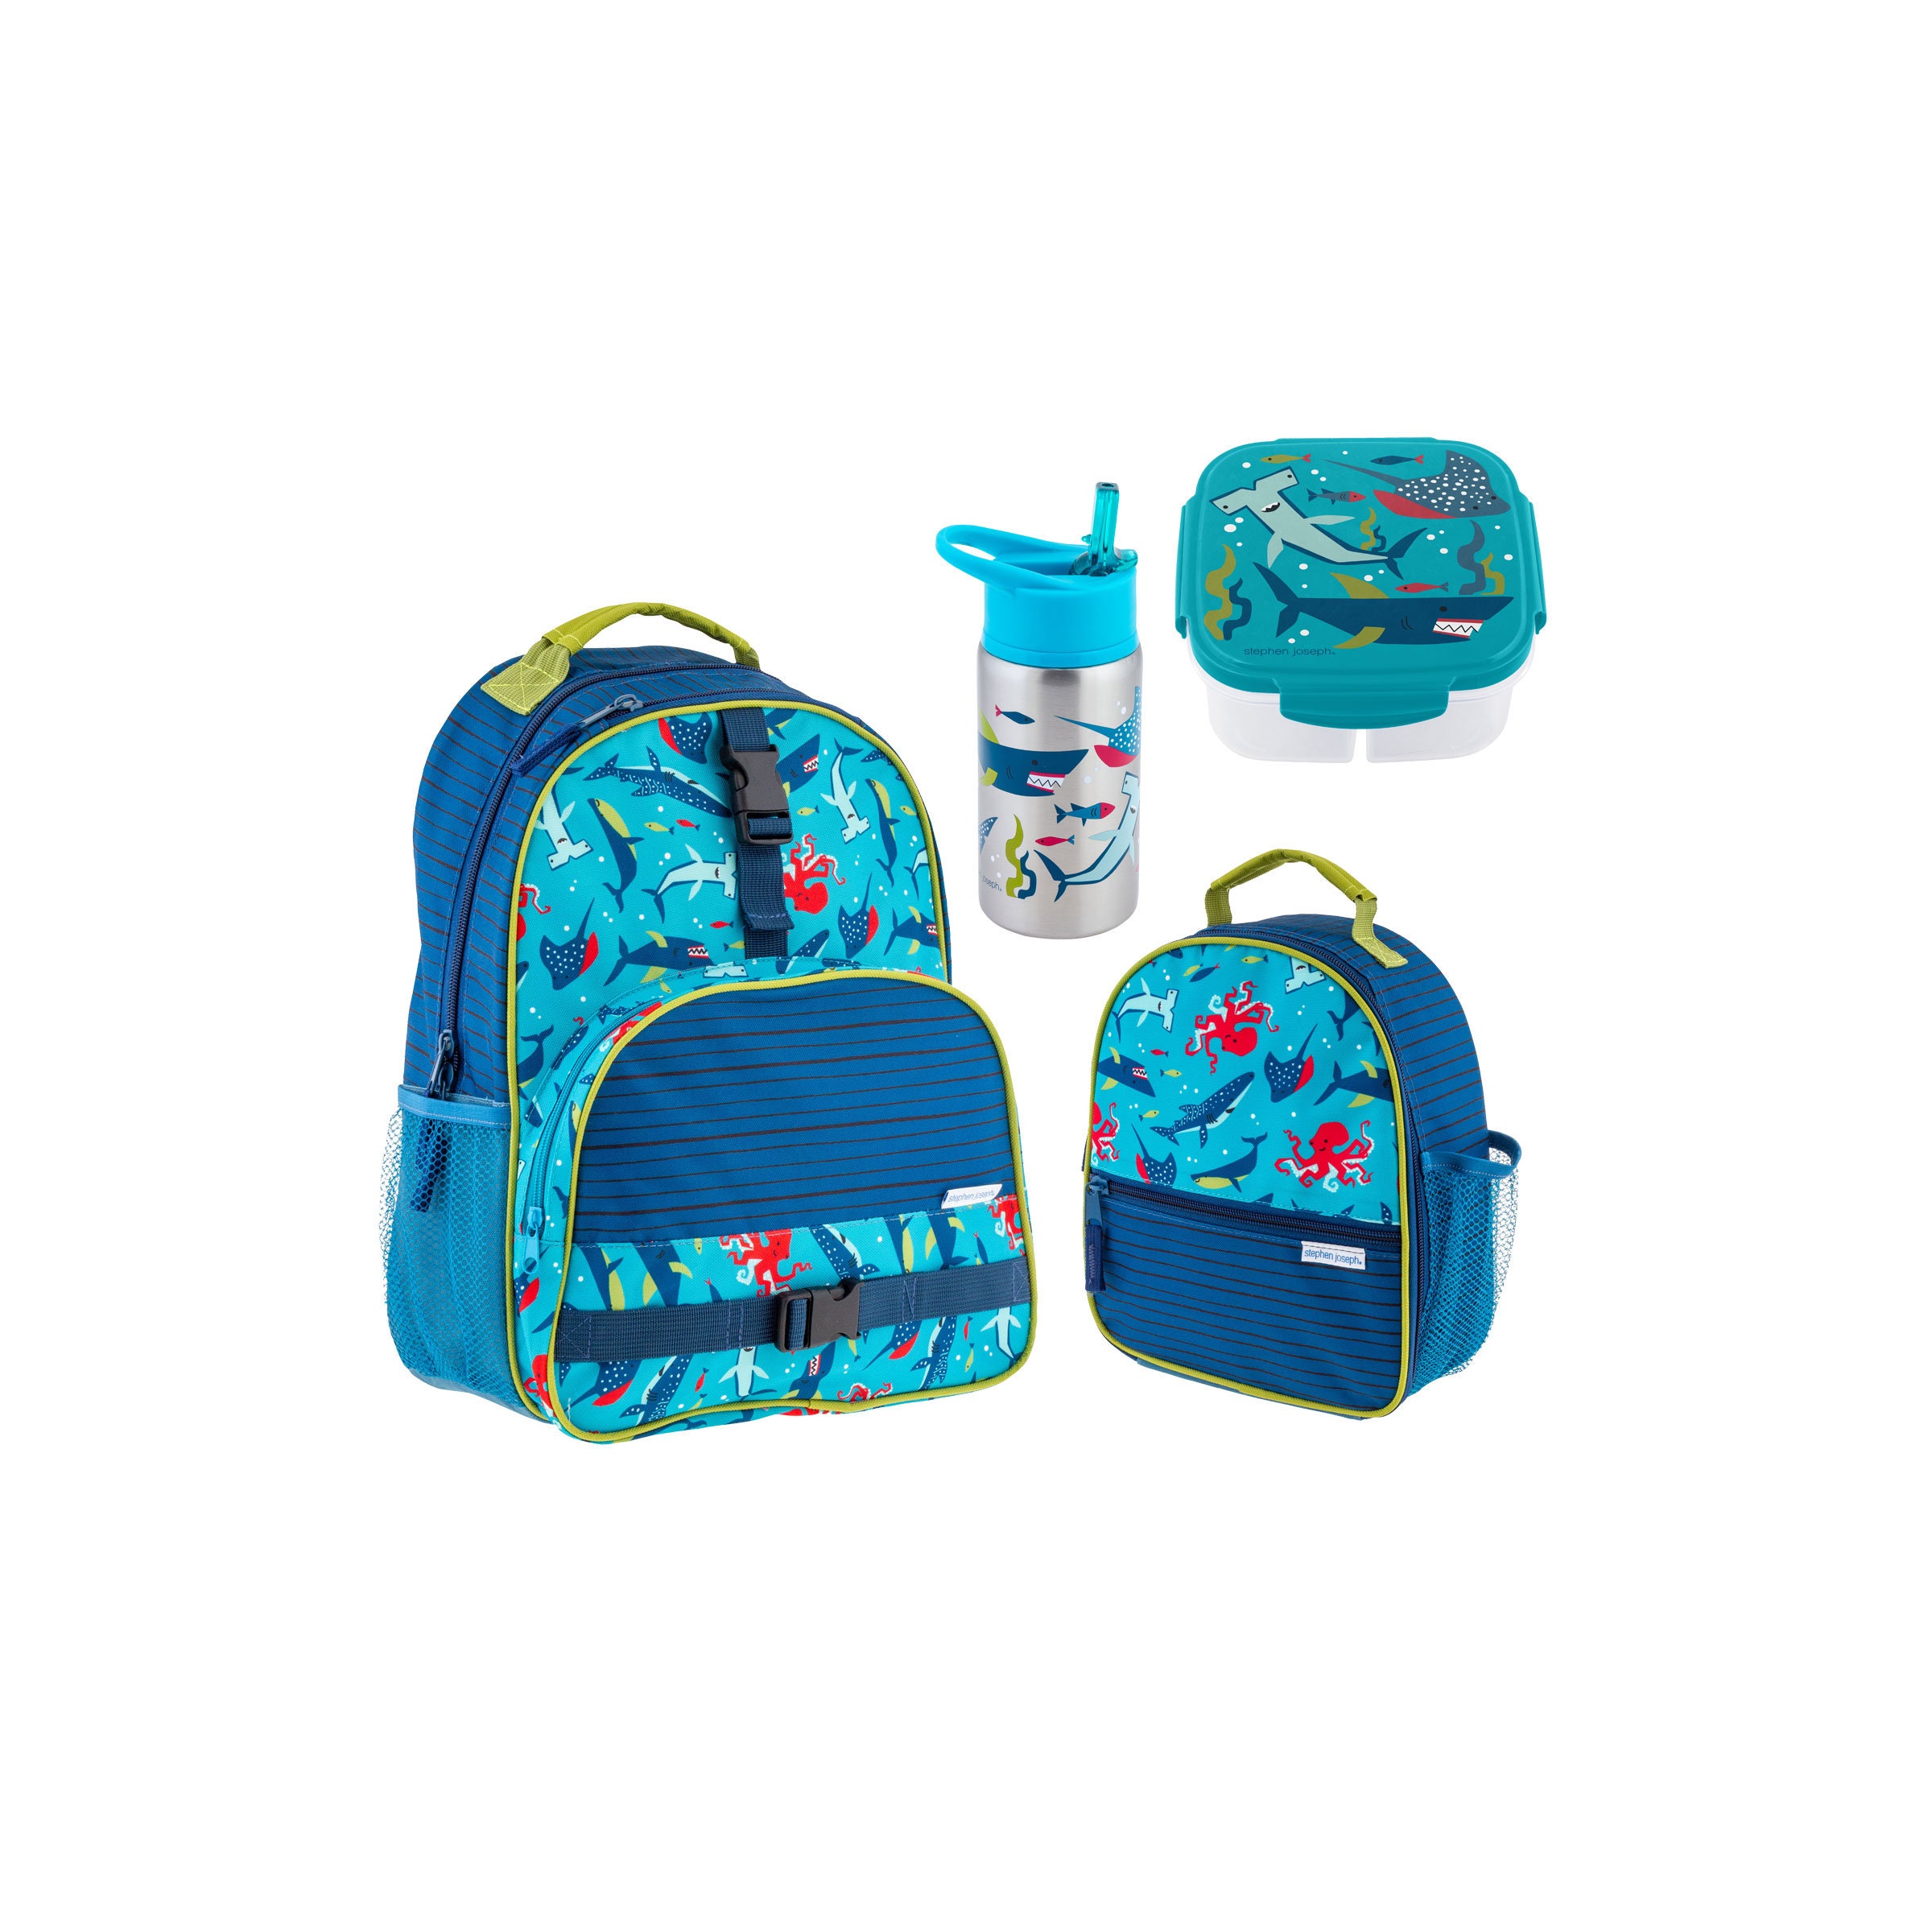 Ralme Boys Gaming Backpack with Lunch Box Boys 6 Piece 16 inch